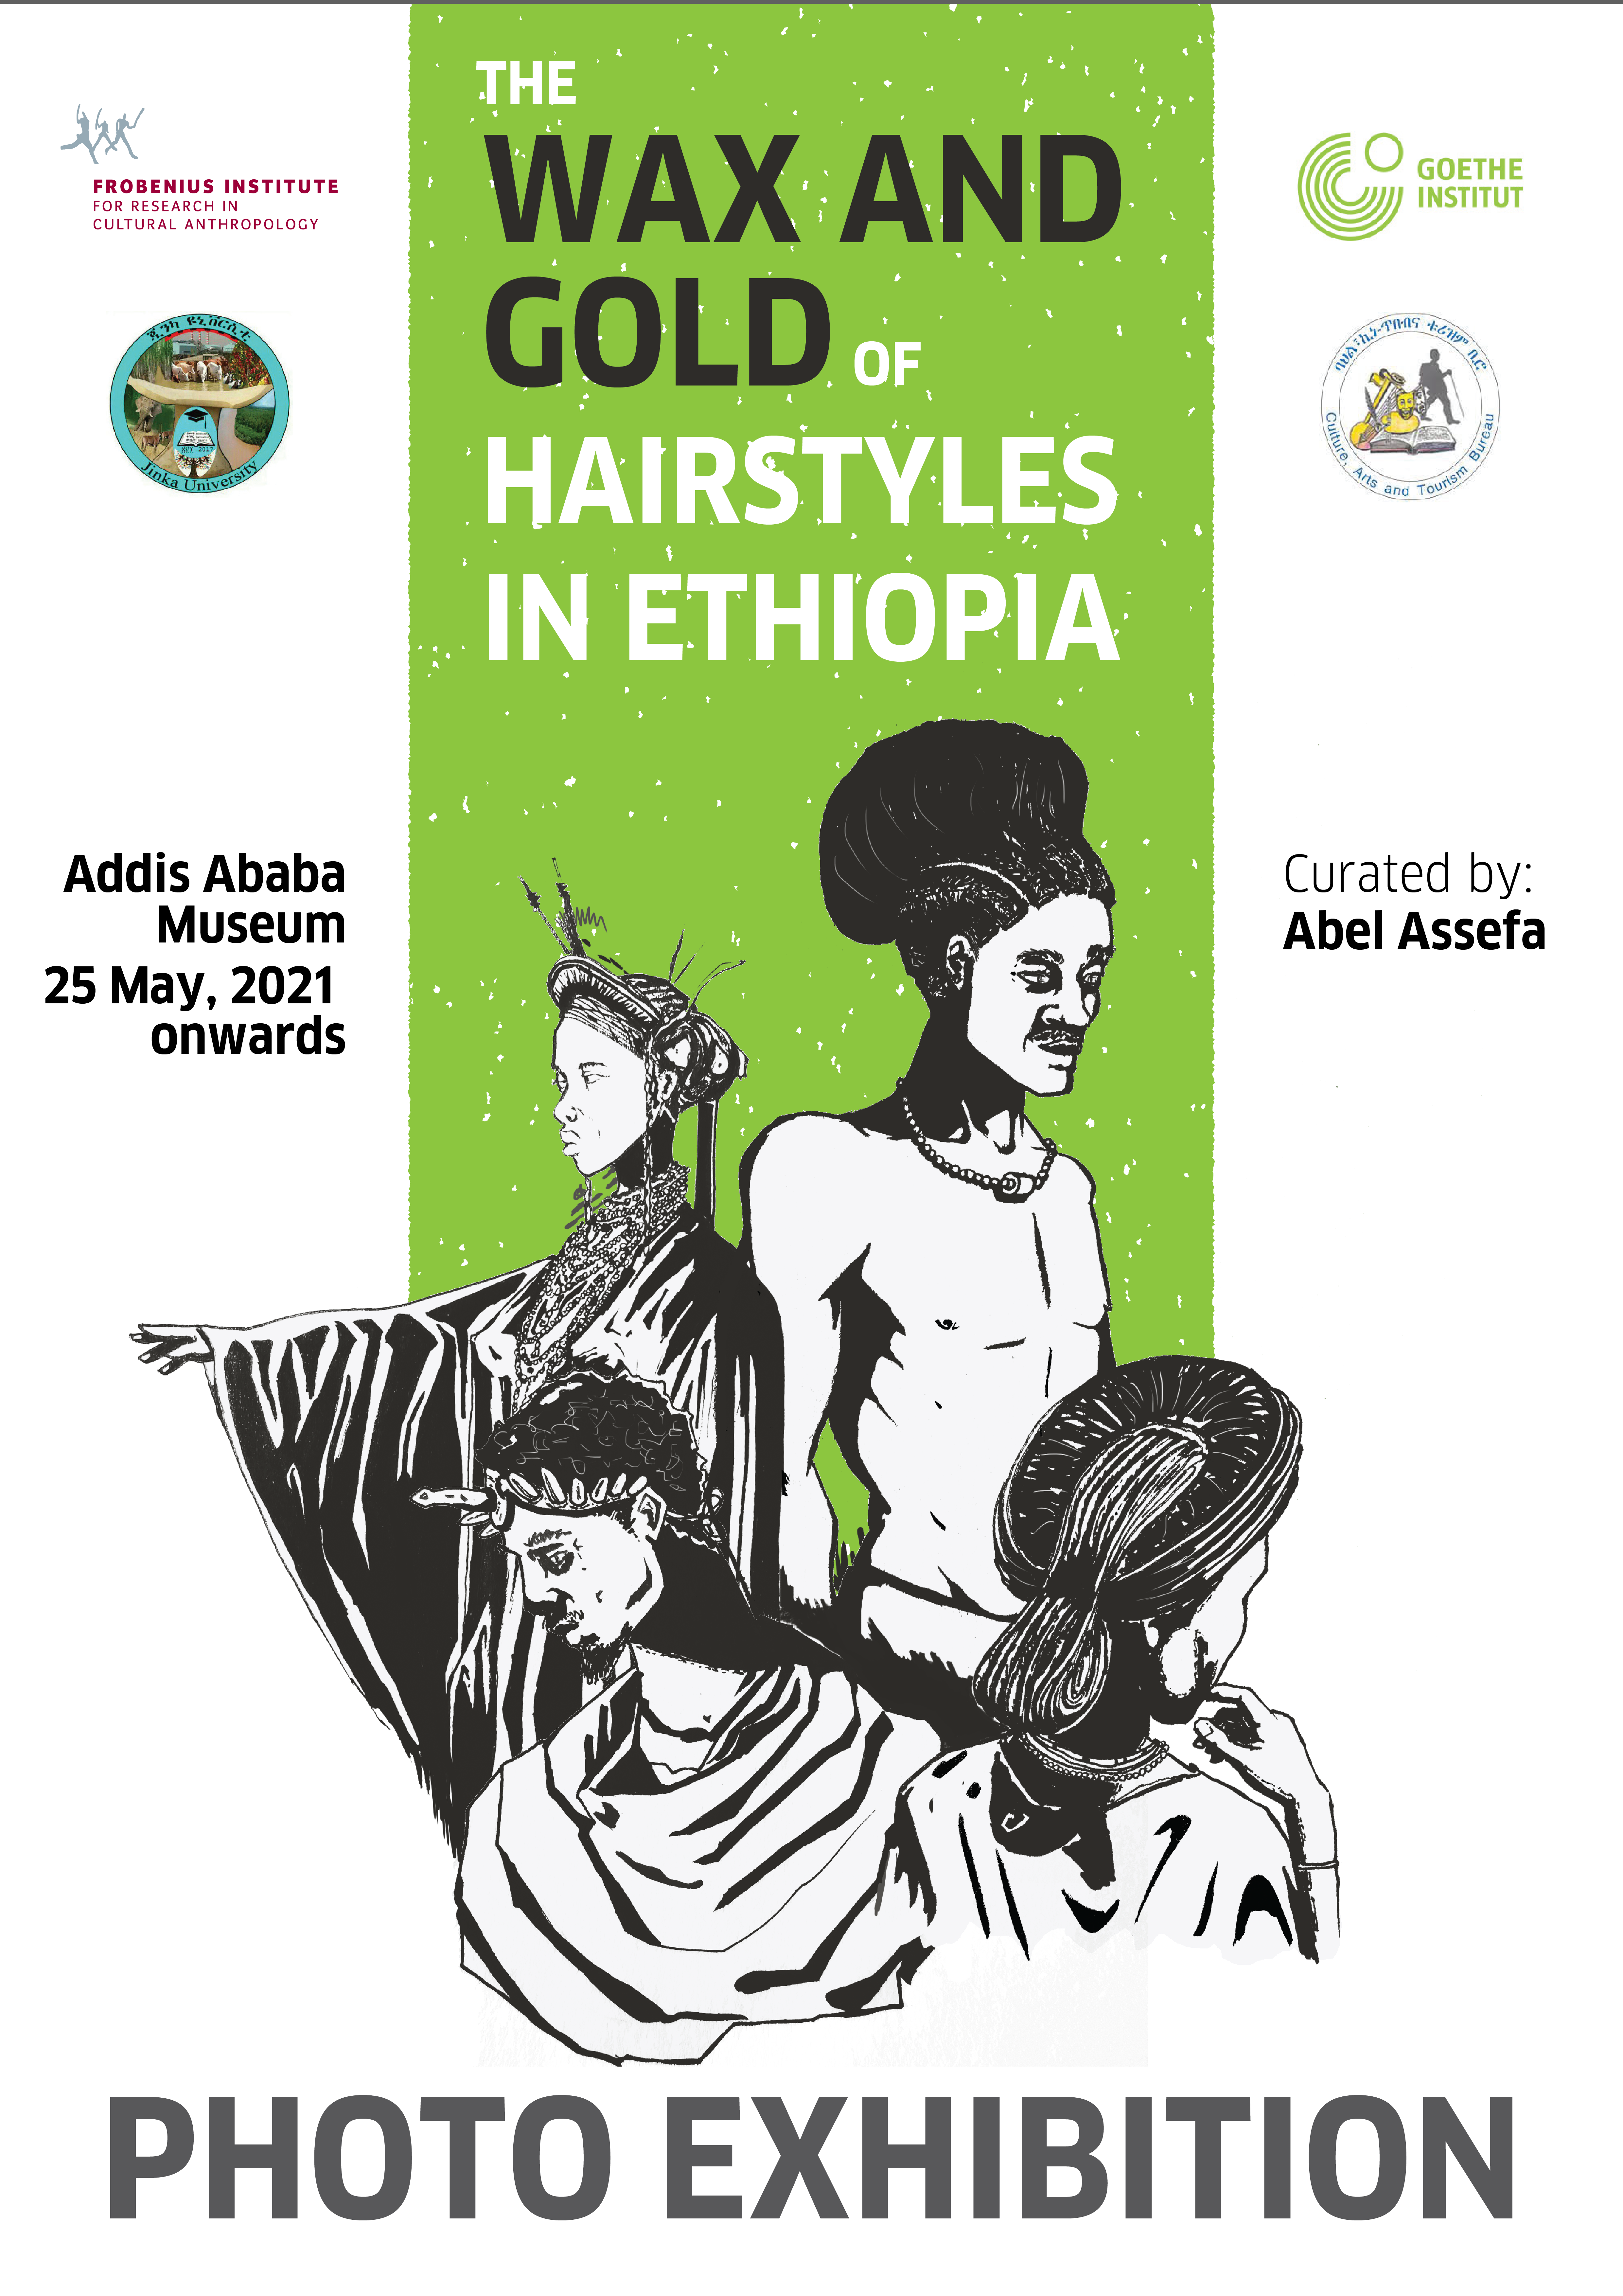 The wax and gold of hairstyles in Ethiopia